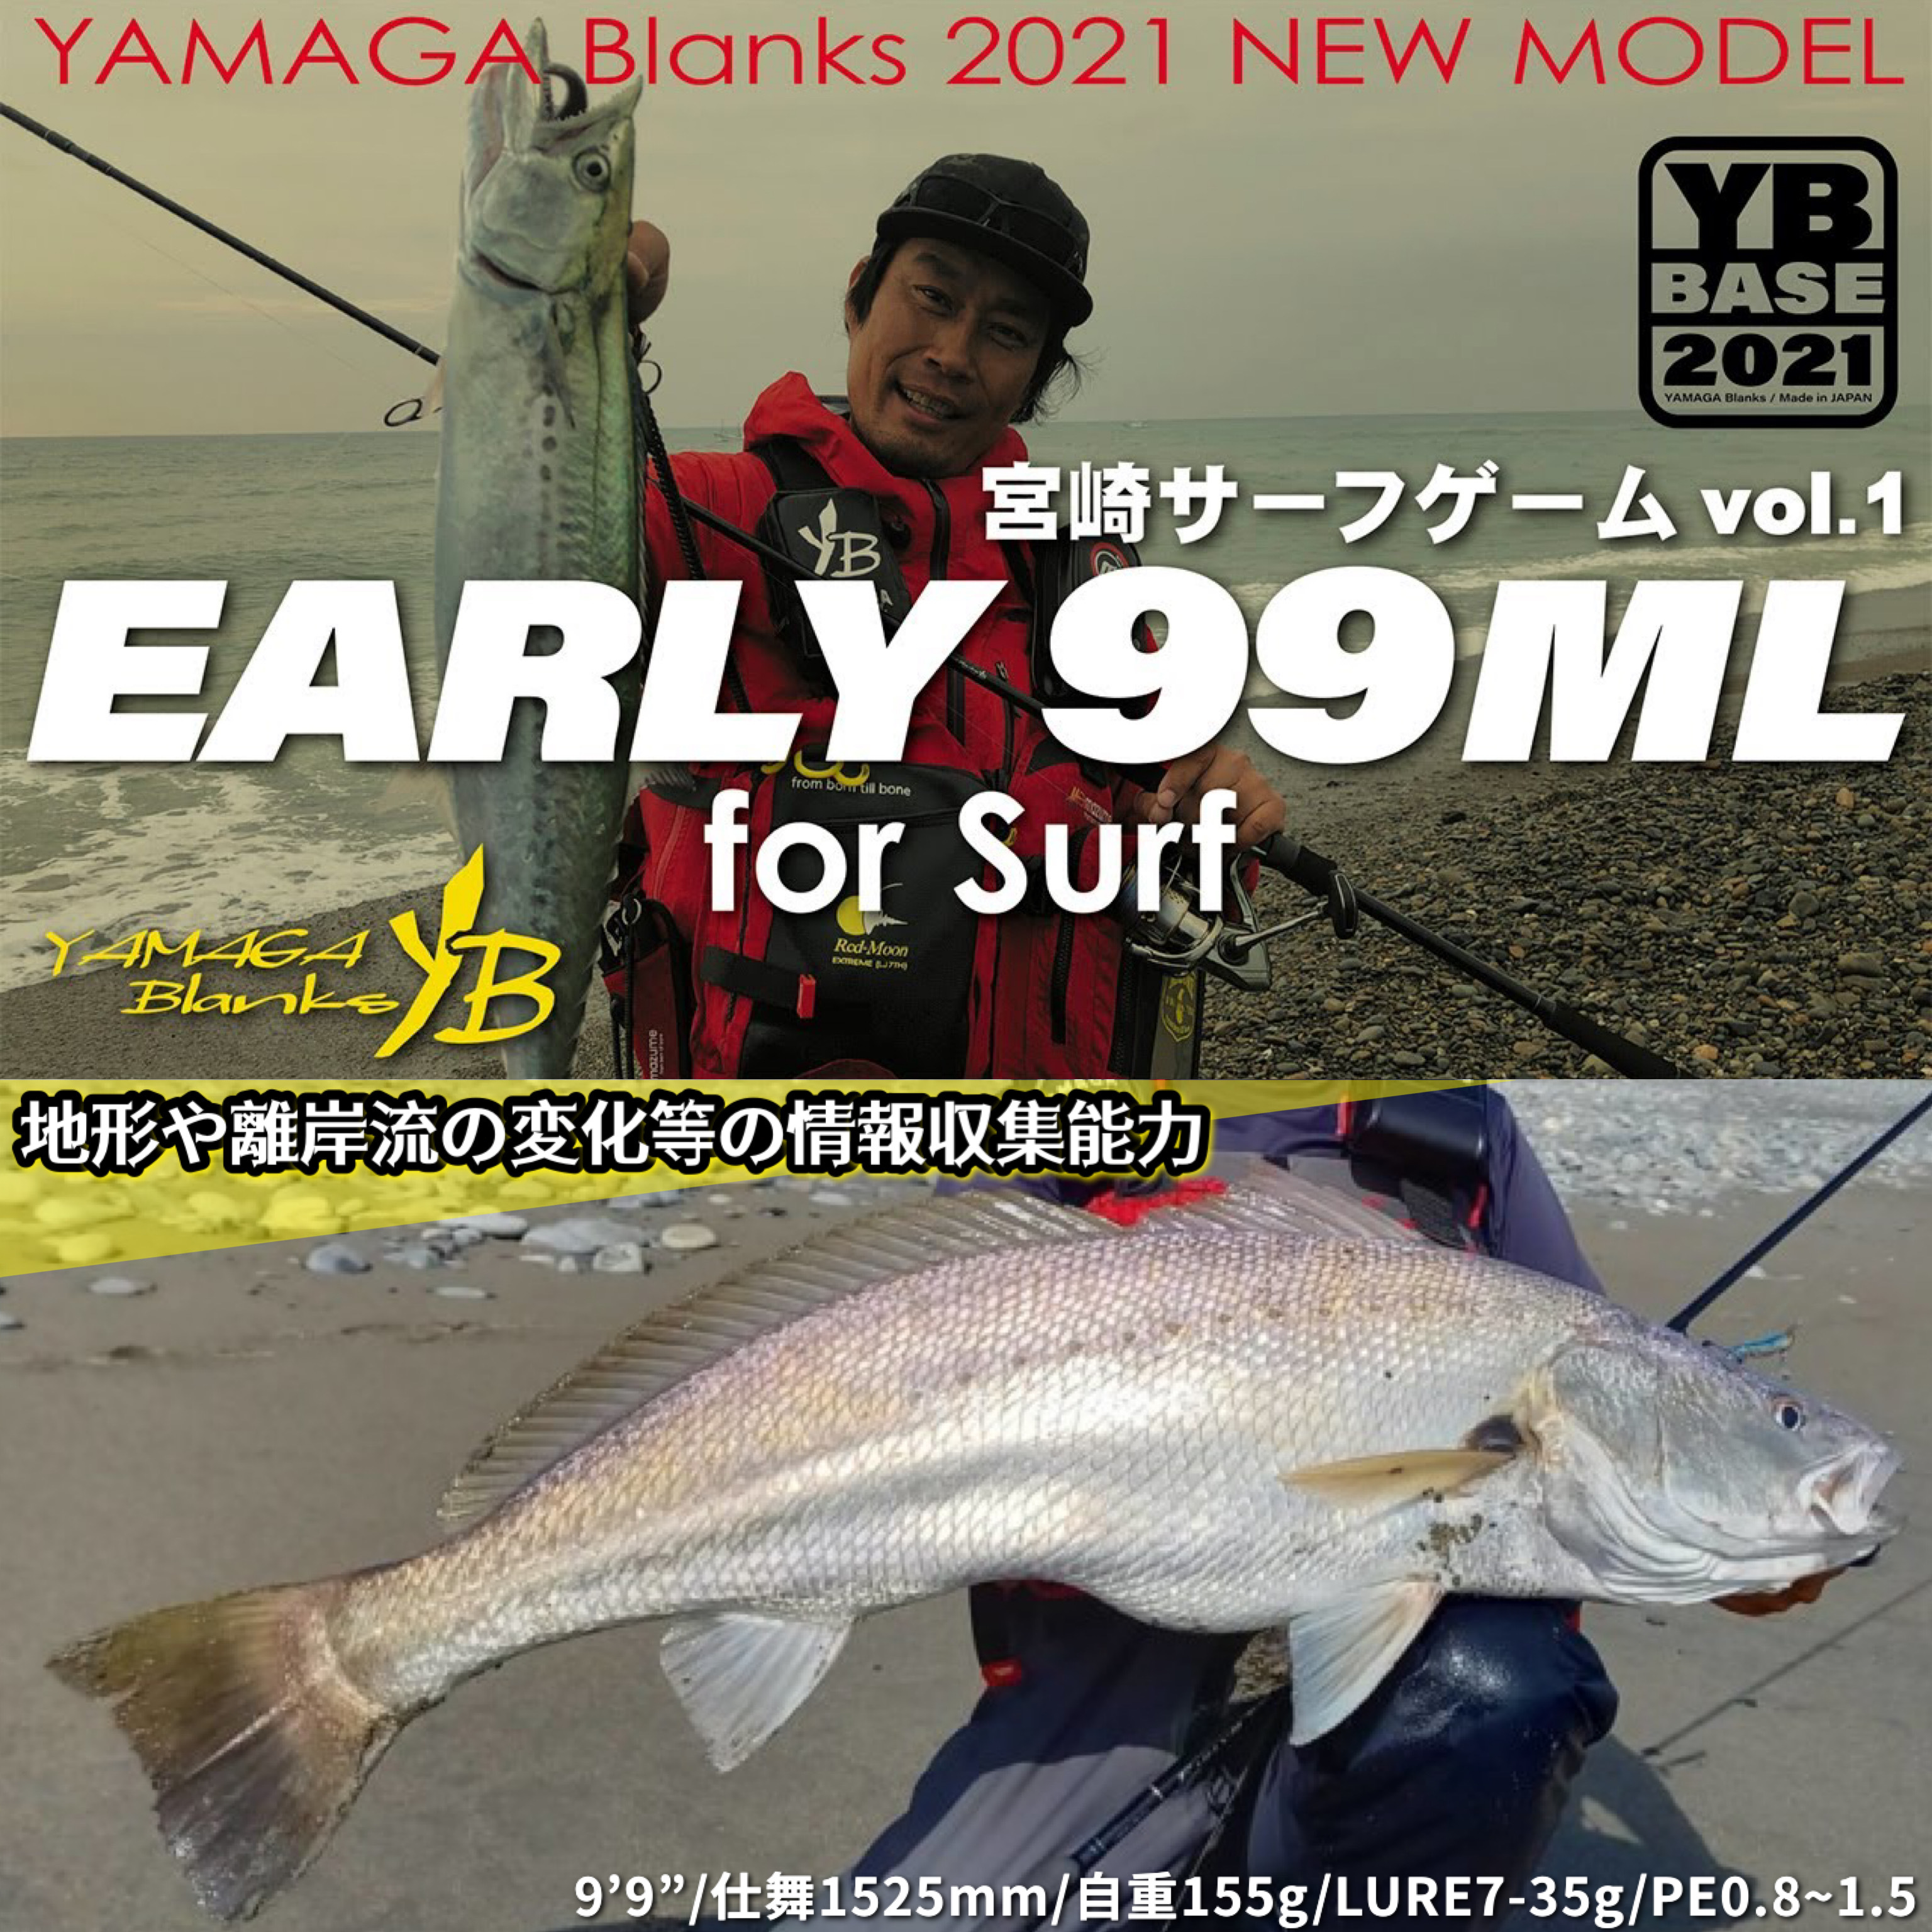 YAMAGA BLANKS EARLY FOR SURF 99ML SHORE CASTING ROD